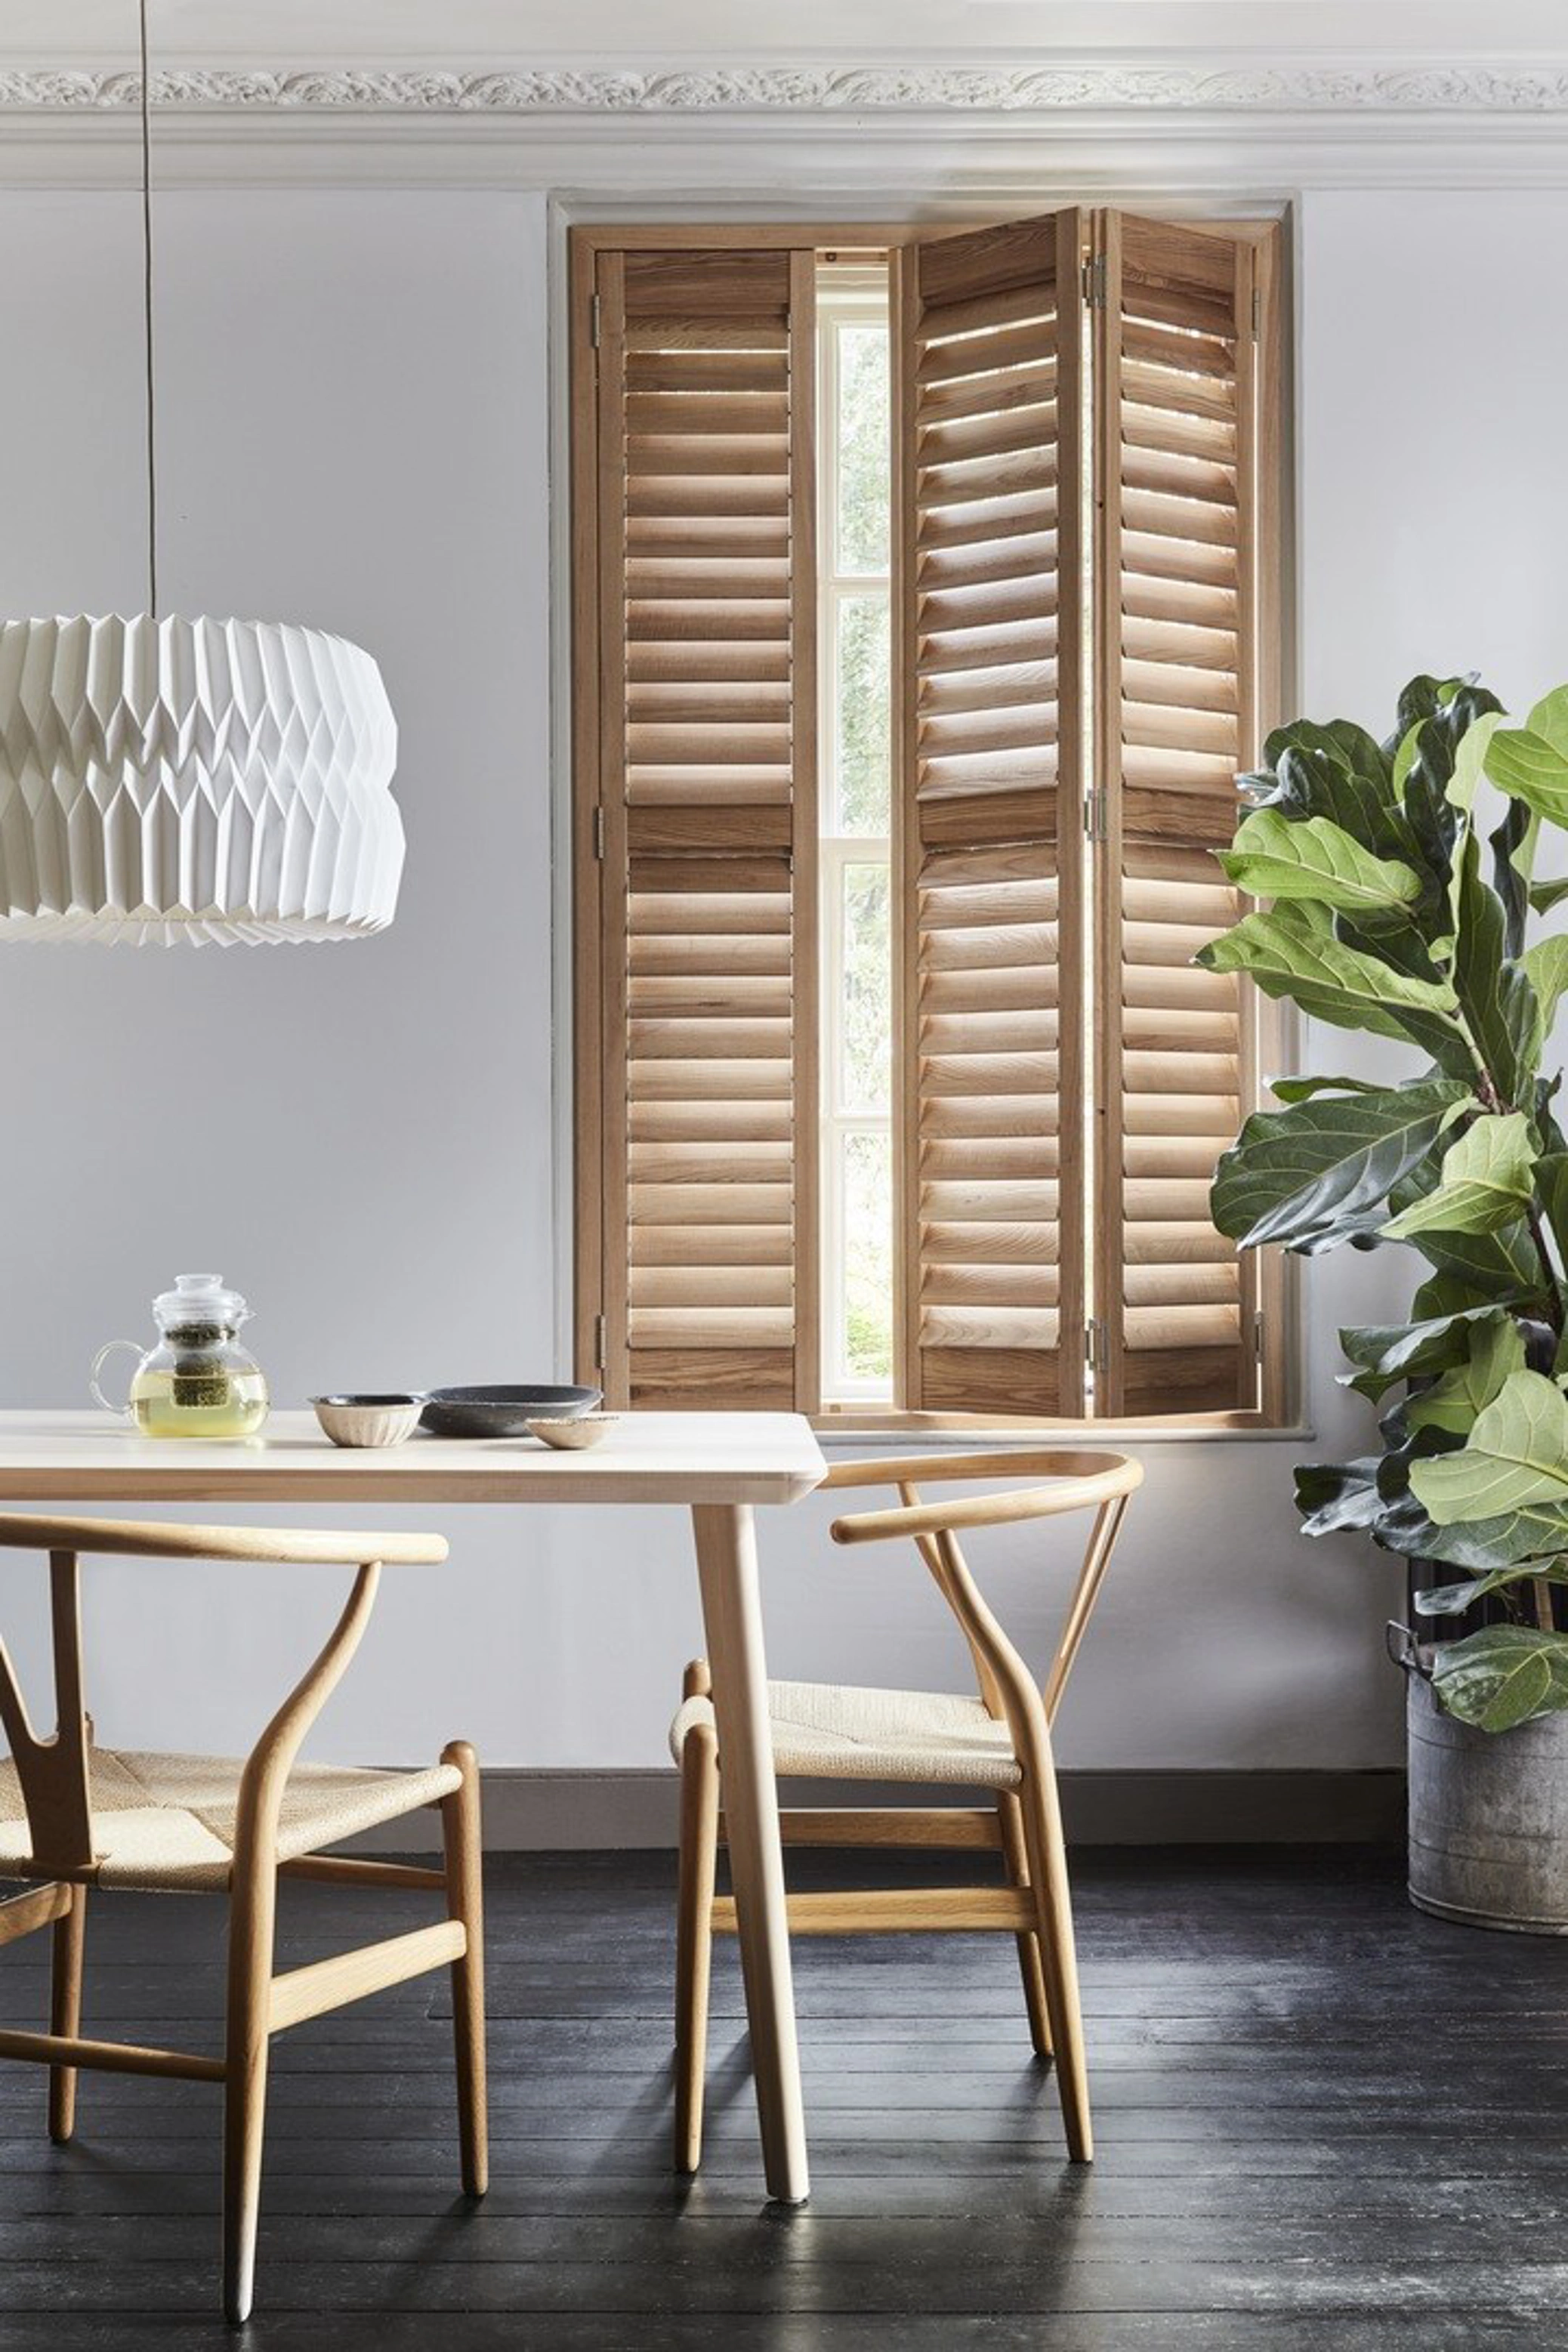 Honey Stained wooden full height shutters in dining room